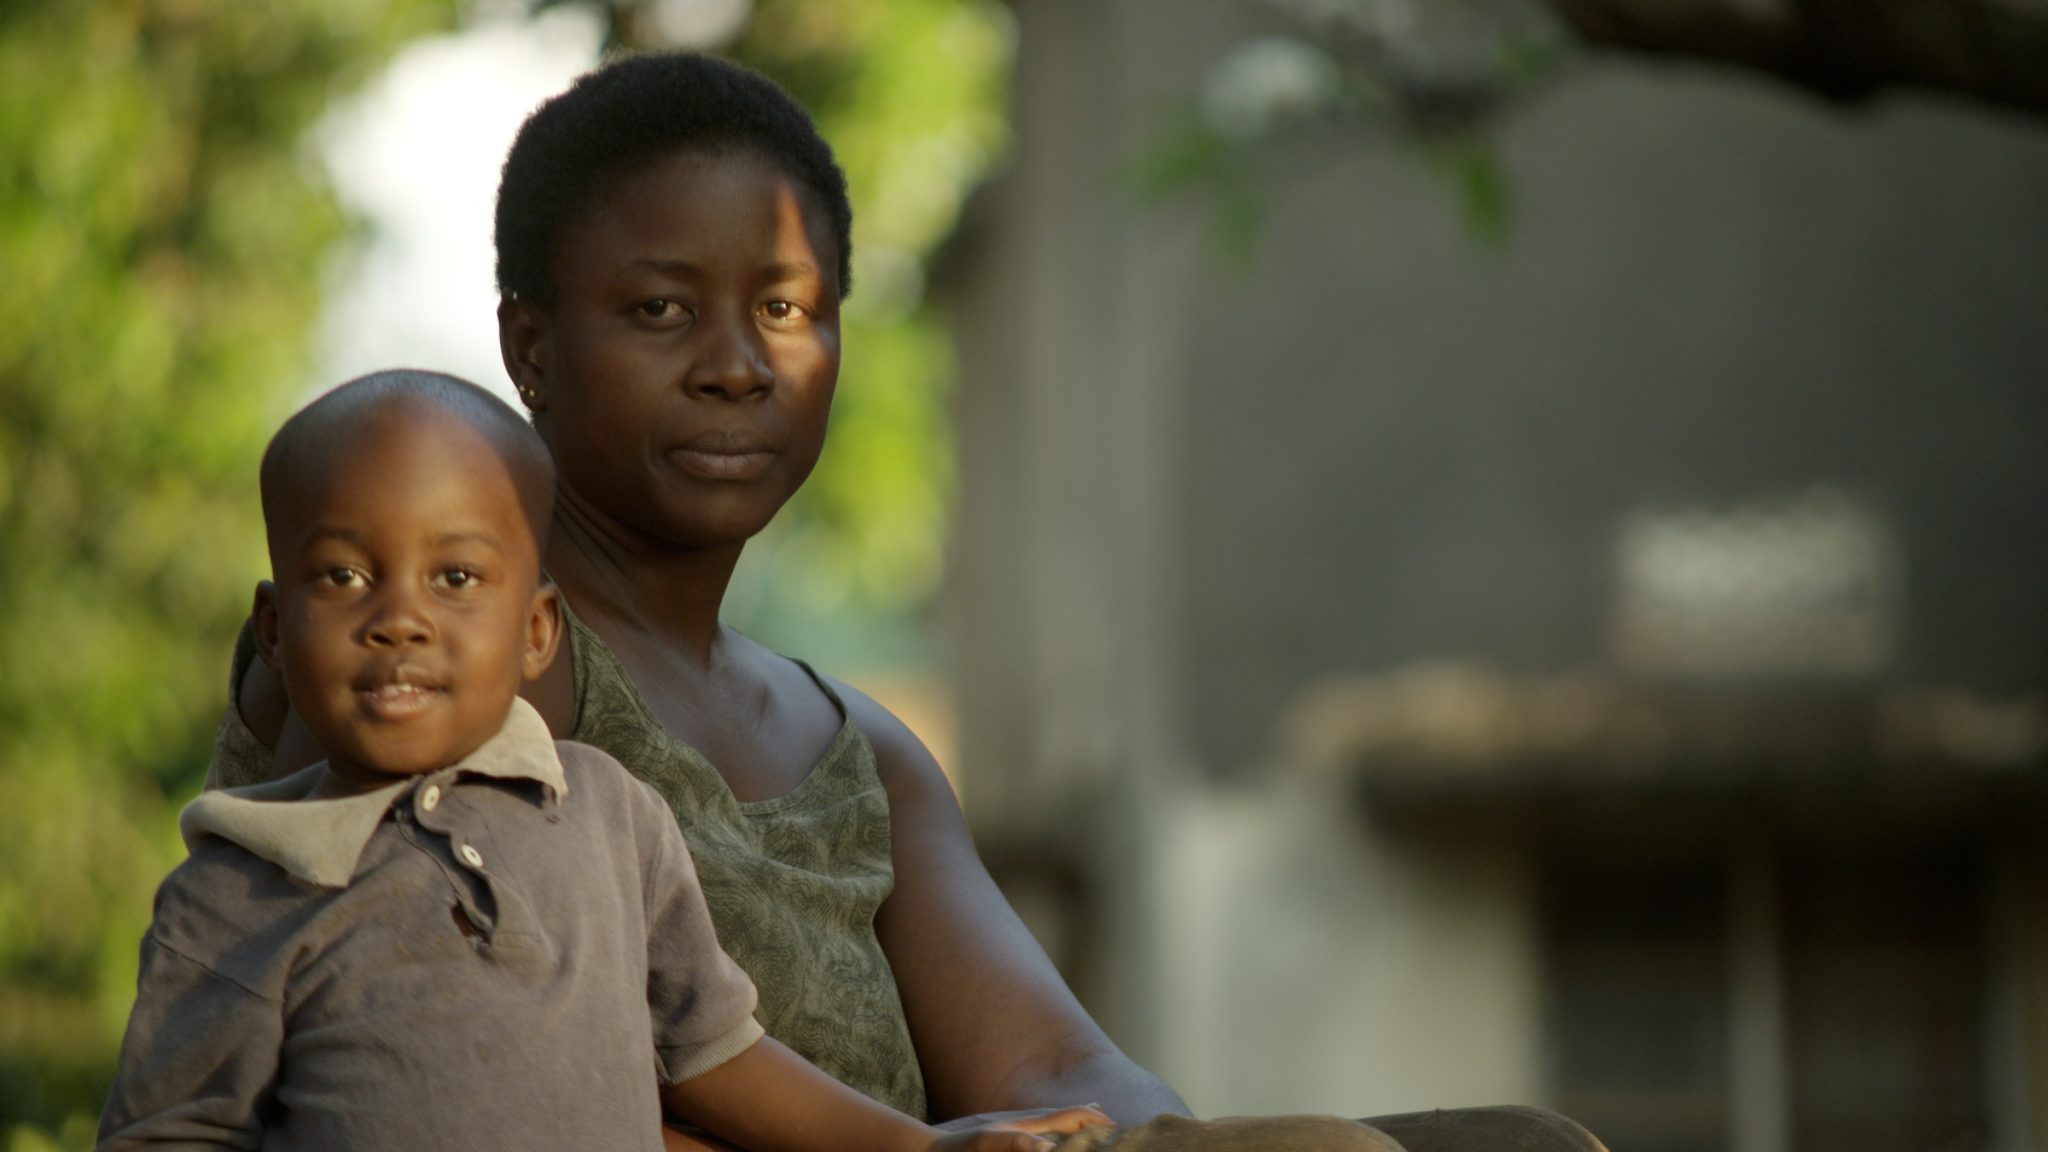 Portrait of a mother and child, early morning in Tororo, Uganda.